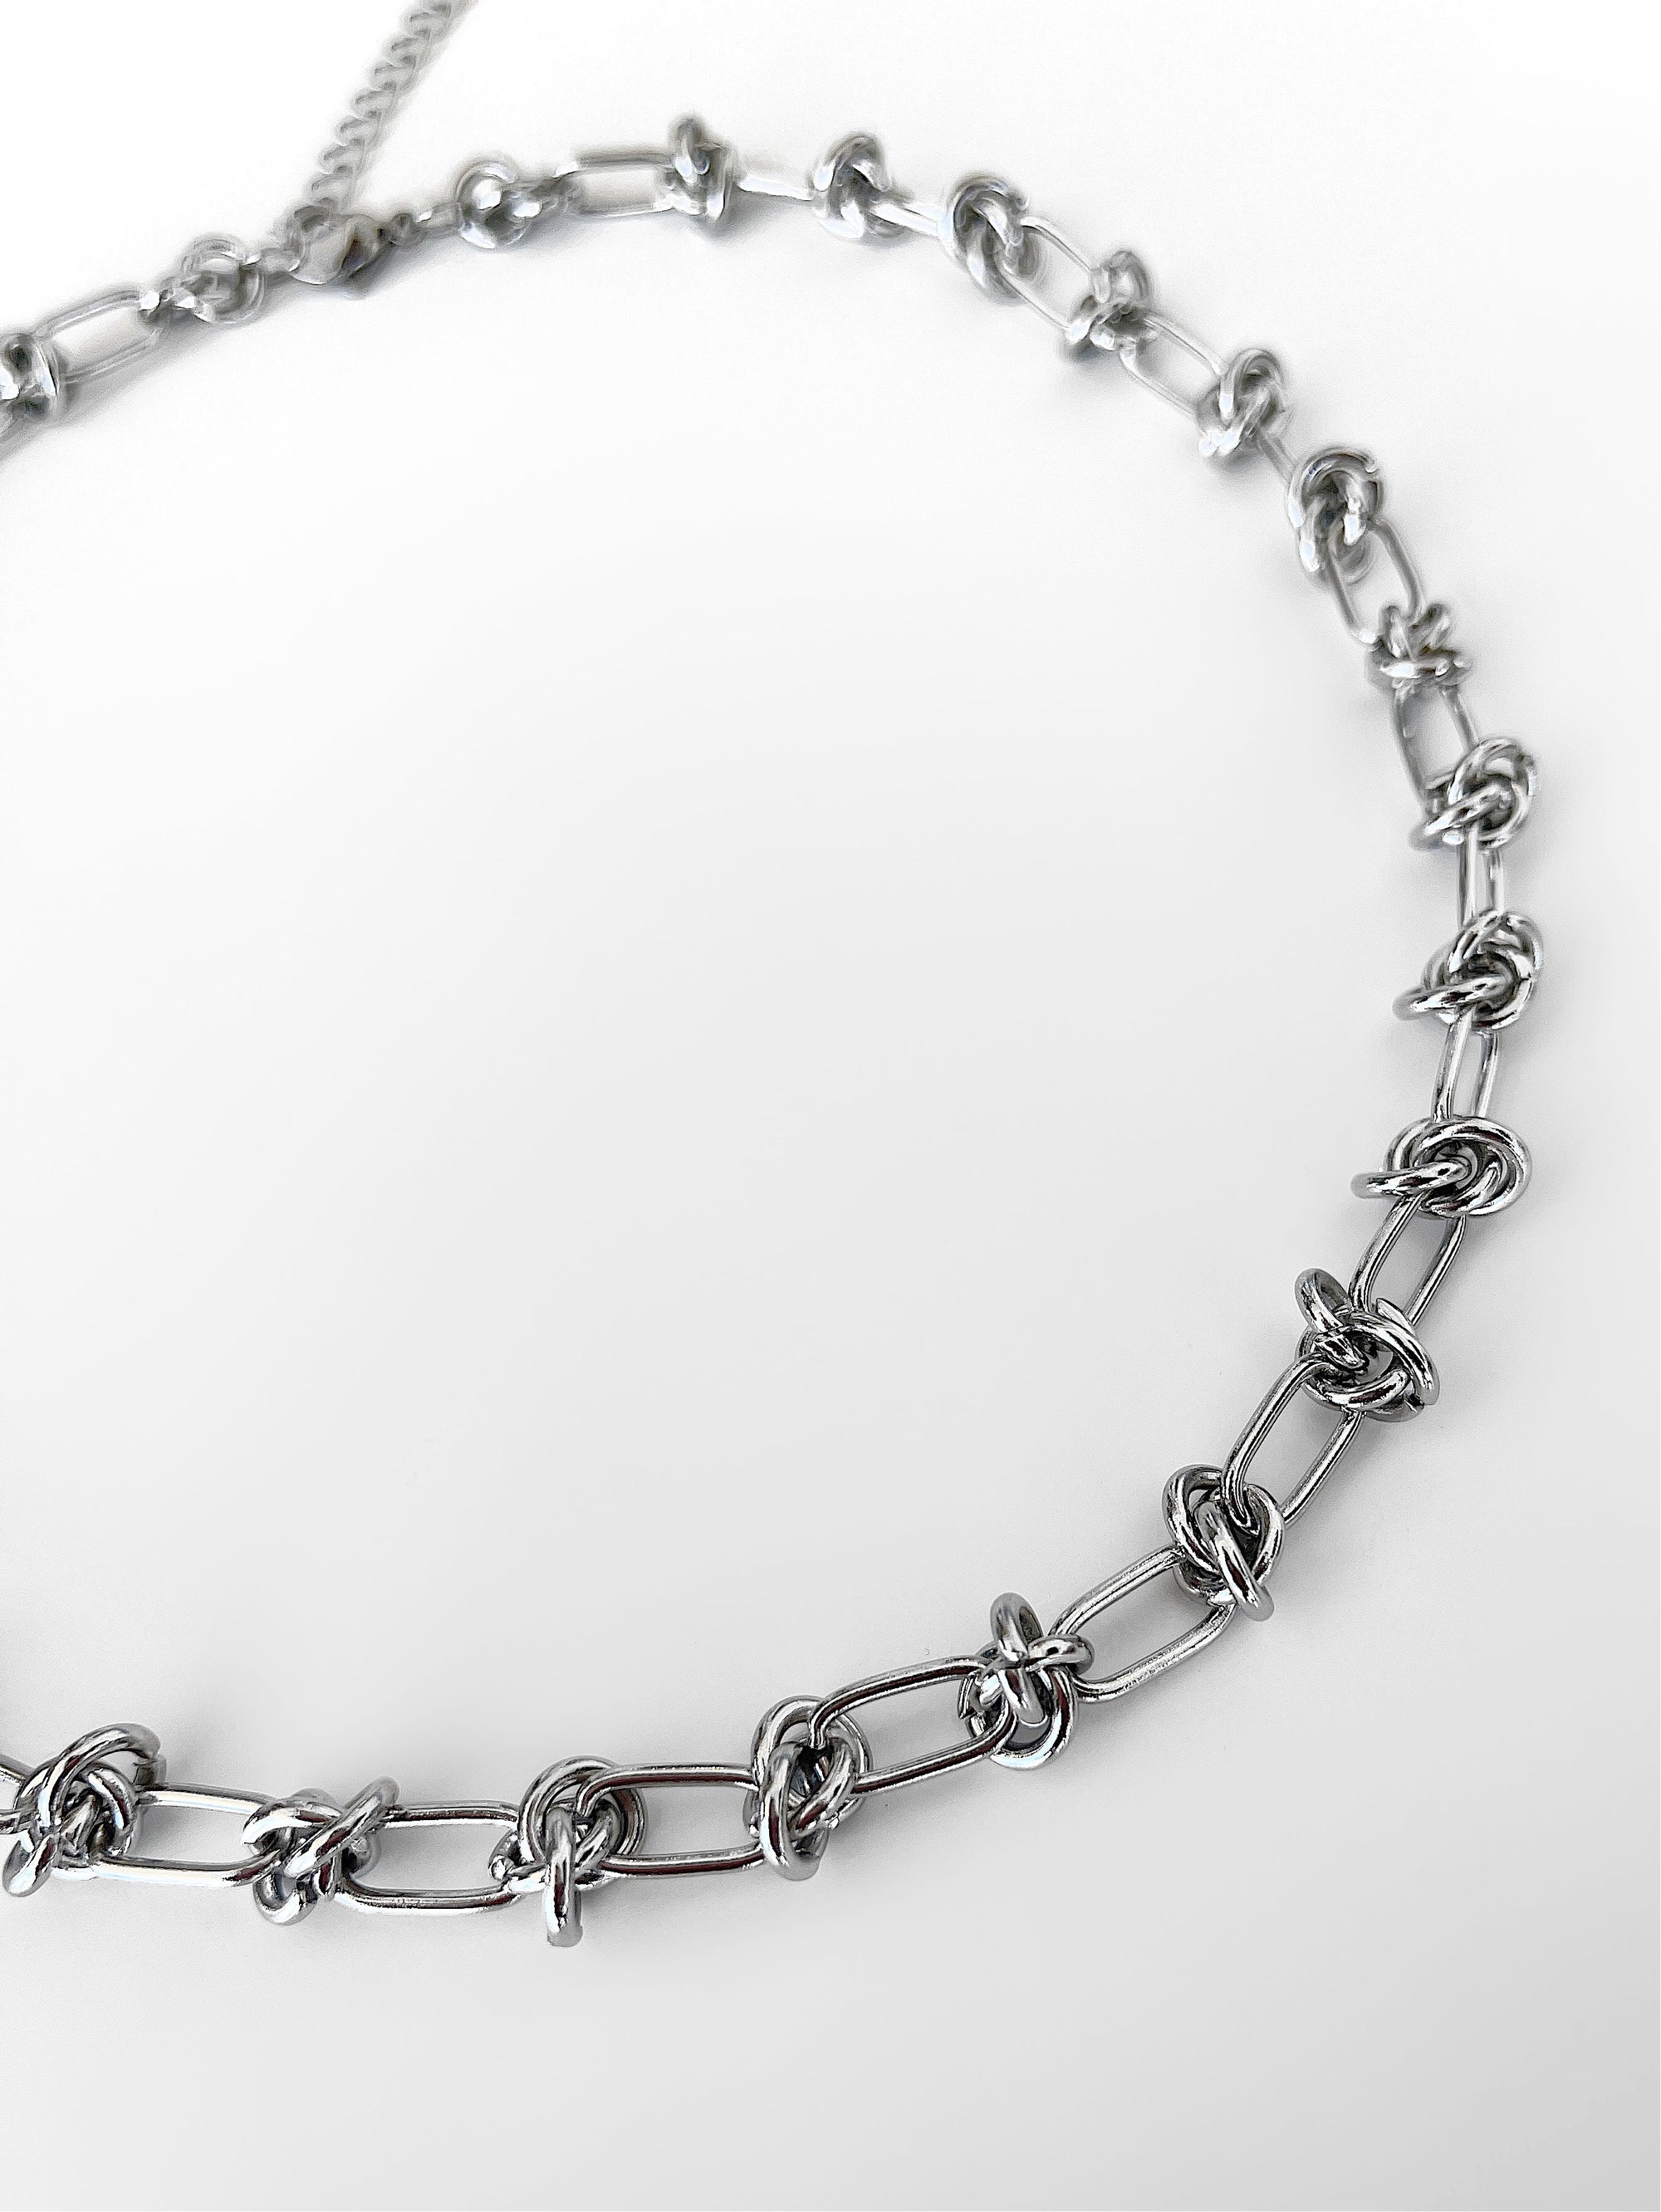 BARBED WIRE CHAIN NECKLACE